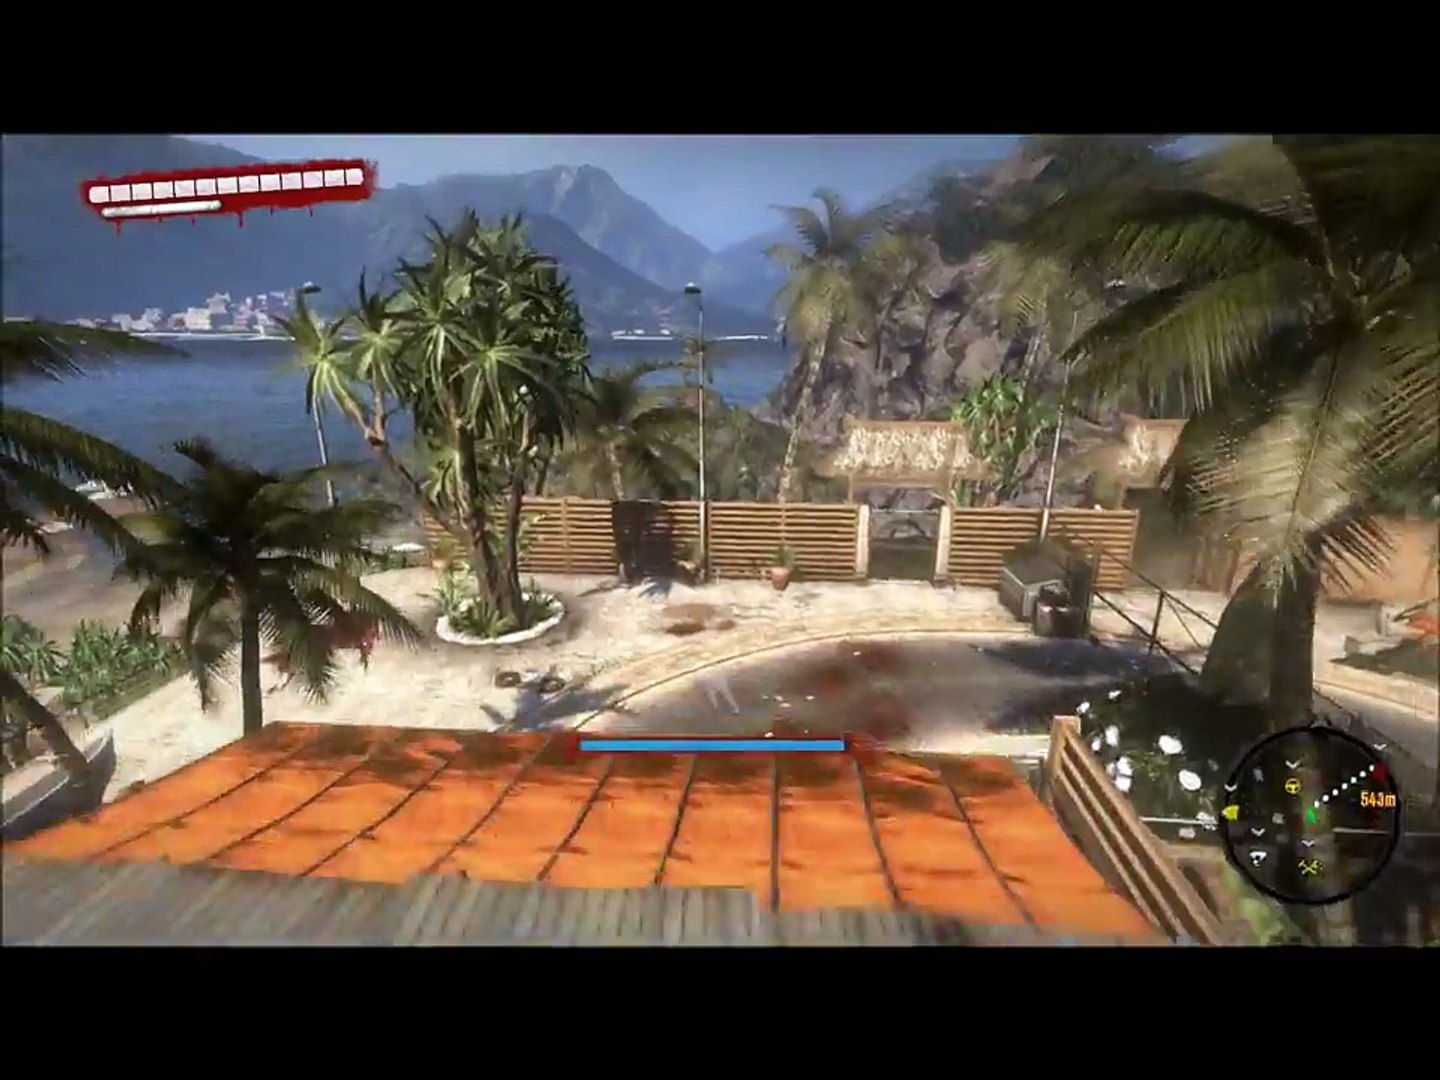 ROYs MOD for Dead island, god mode, super jump, and much more! with LINK! - 